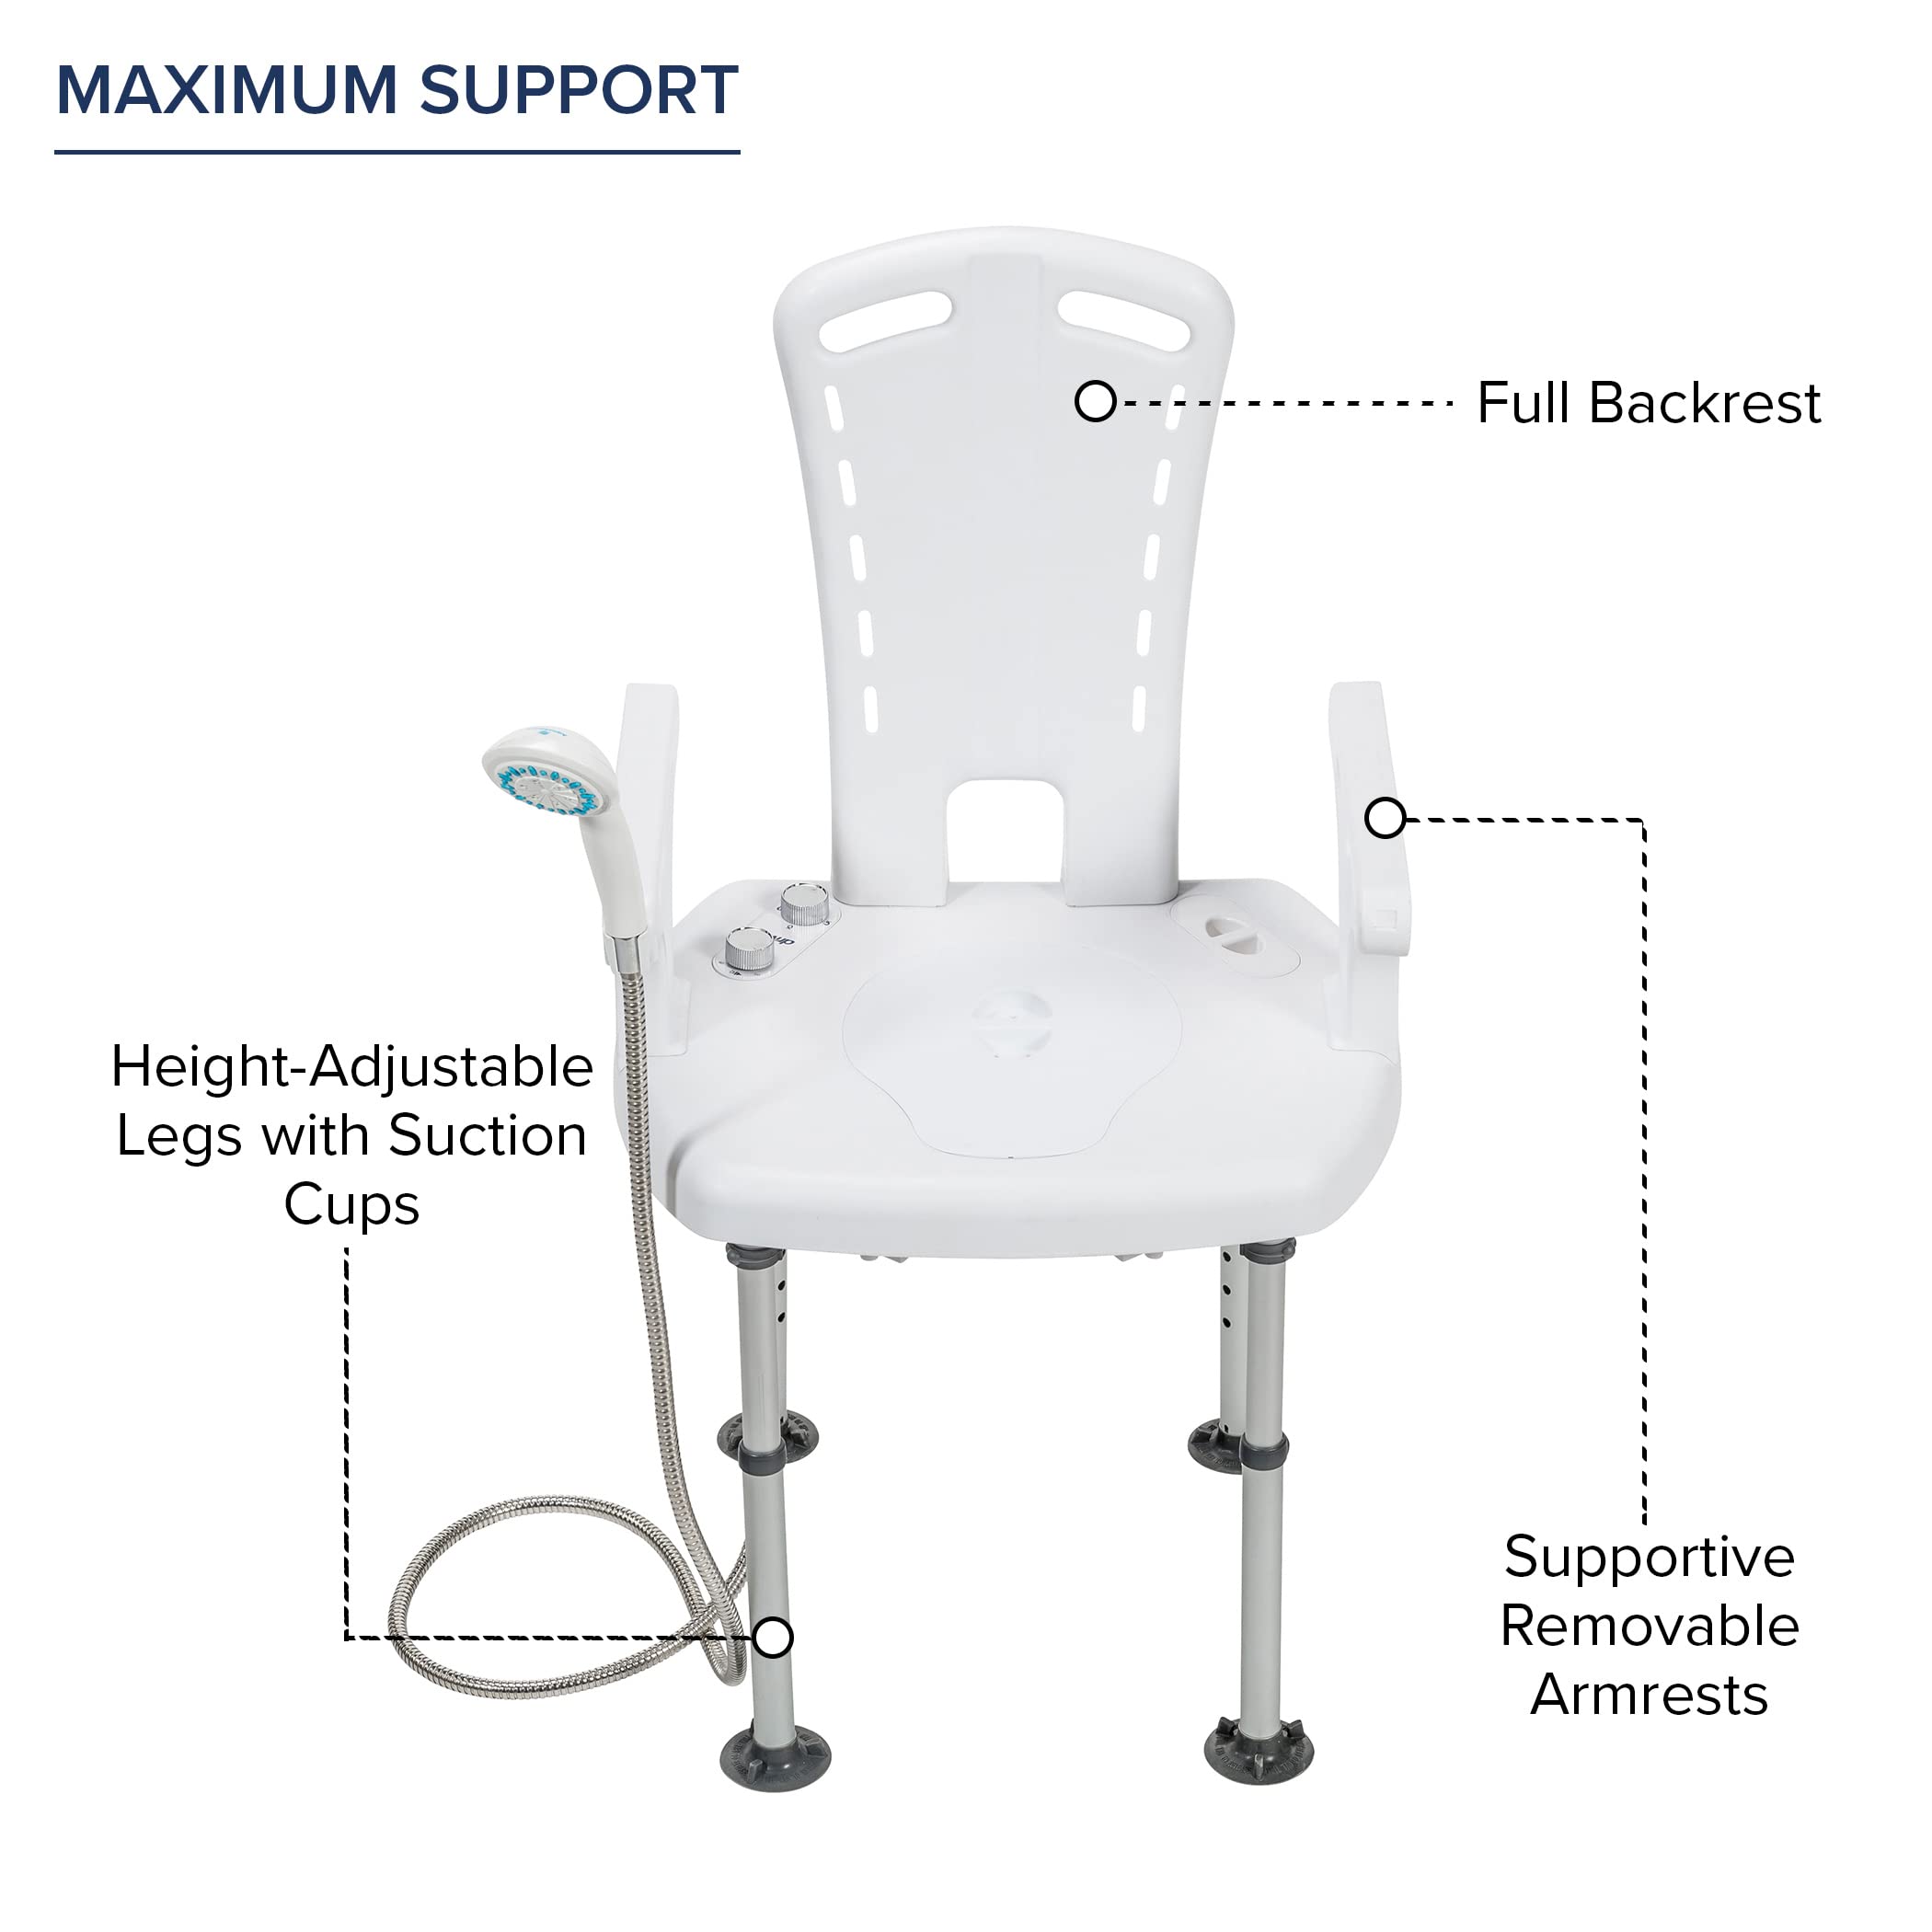 Drive Medical PreserveTech Aquachair Bathing System with Bidet, Premium Shower Chair with Back, Arms & Shower Sprayer, Tub Chair with Cutout Seat, Bath & Shower Chair, Shower Commode Chair